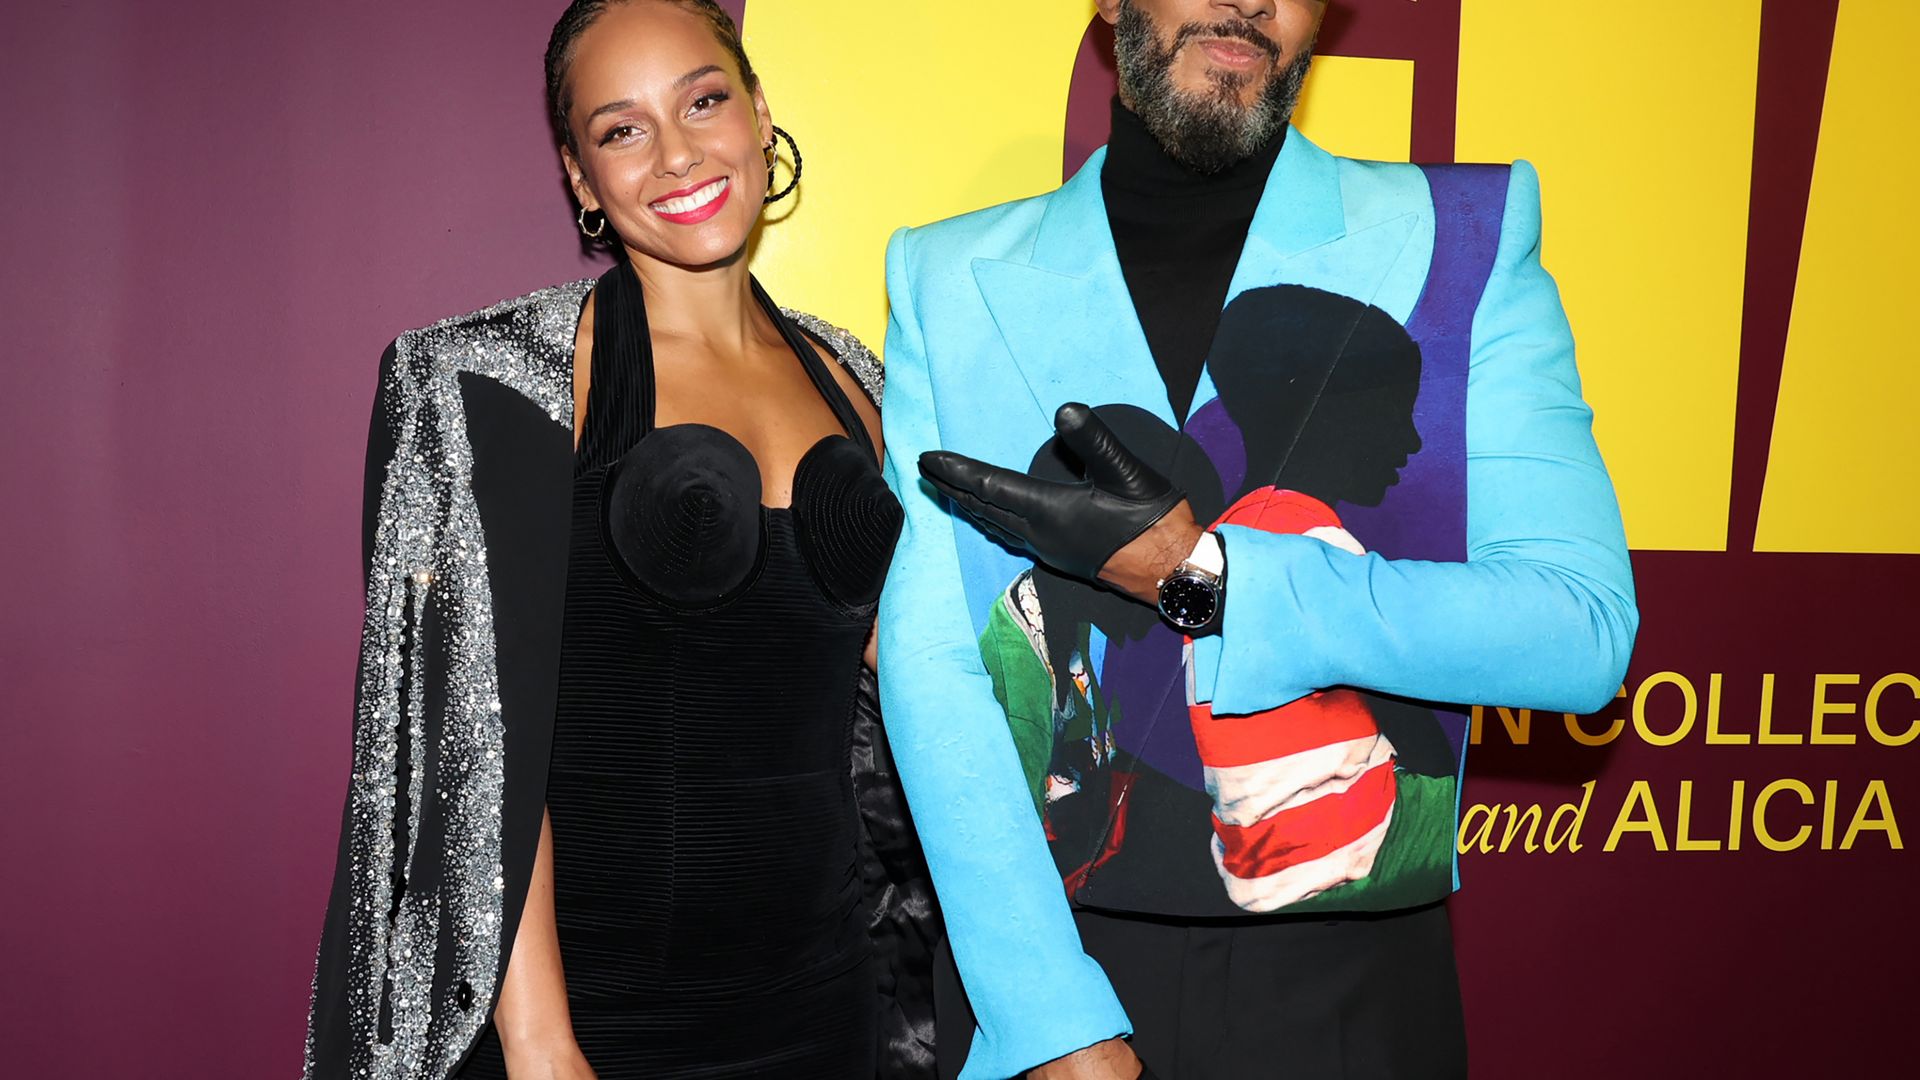 Alicia Keys' husband Swizz Beatz is goals as he shares emotion-filled message dedicated to singer